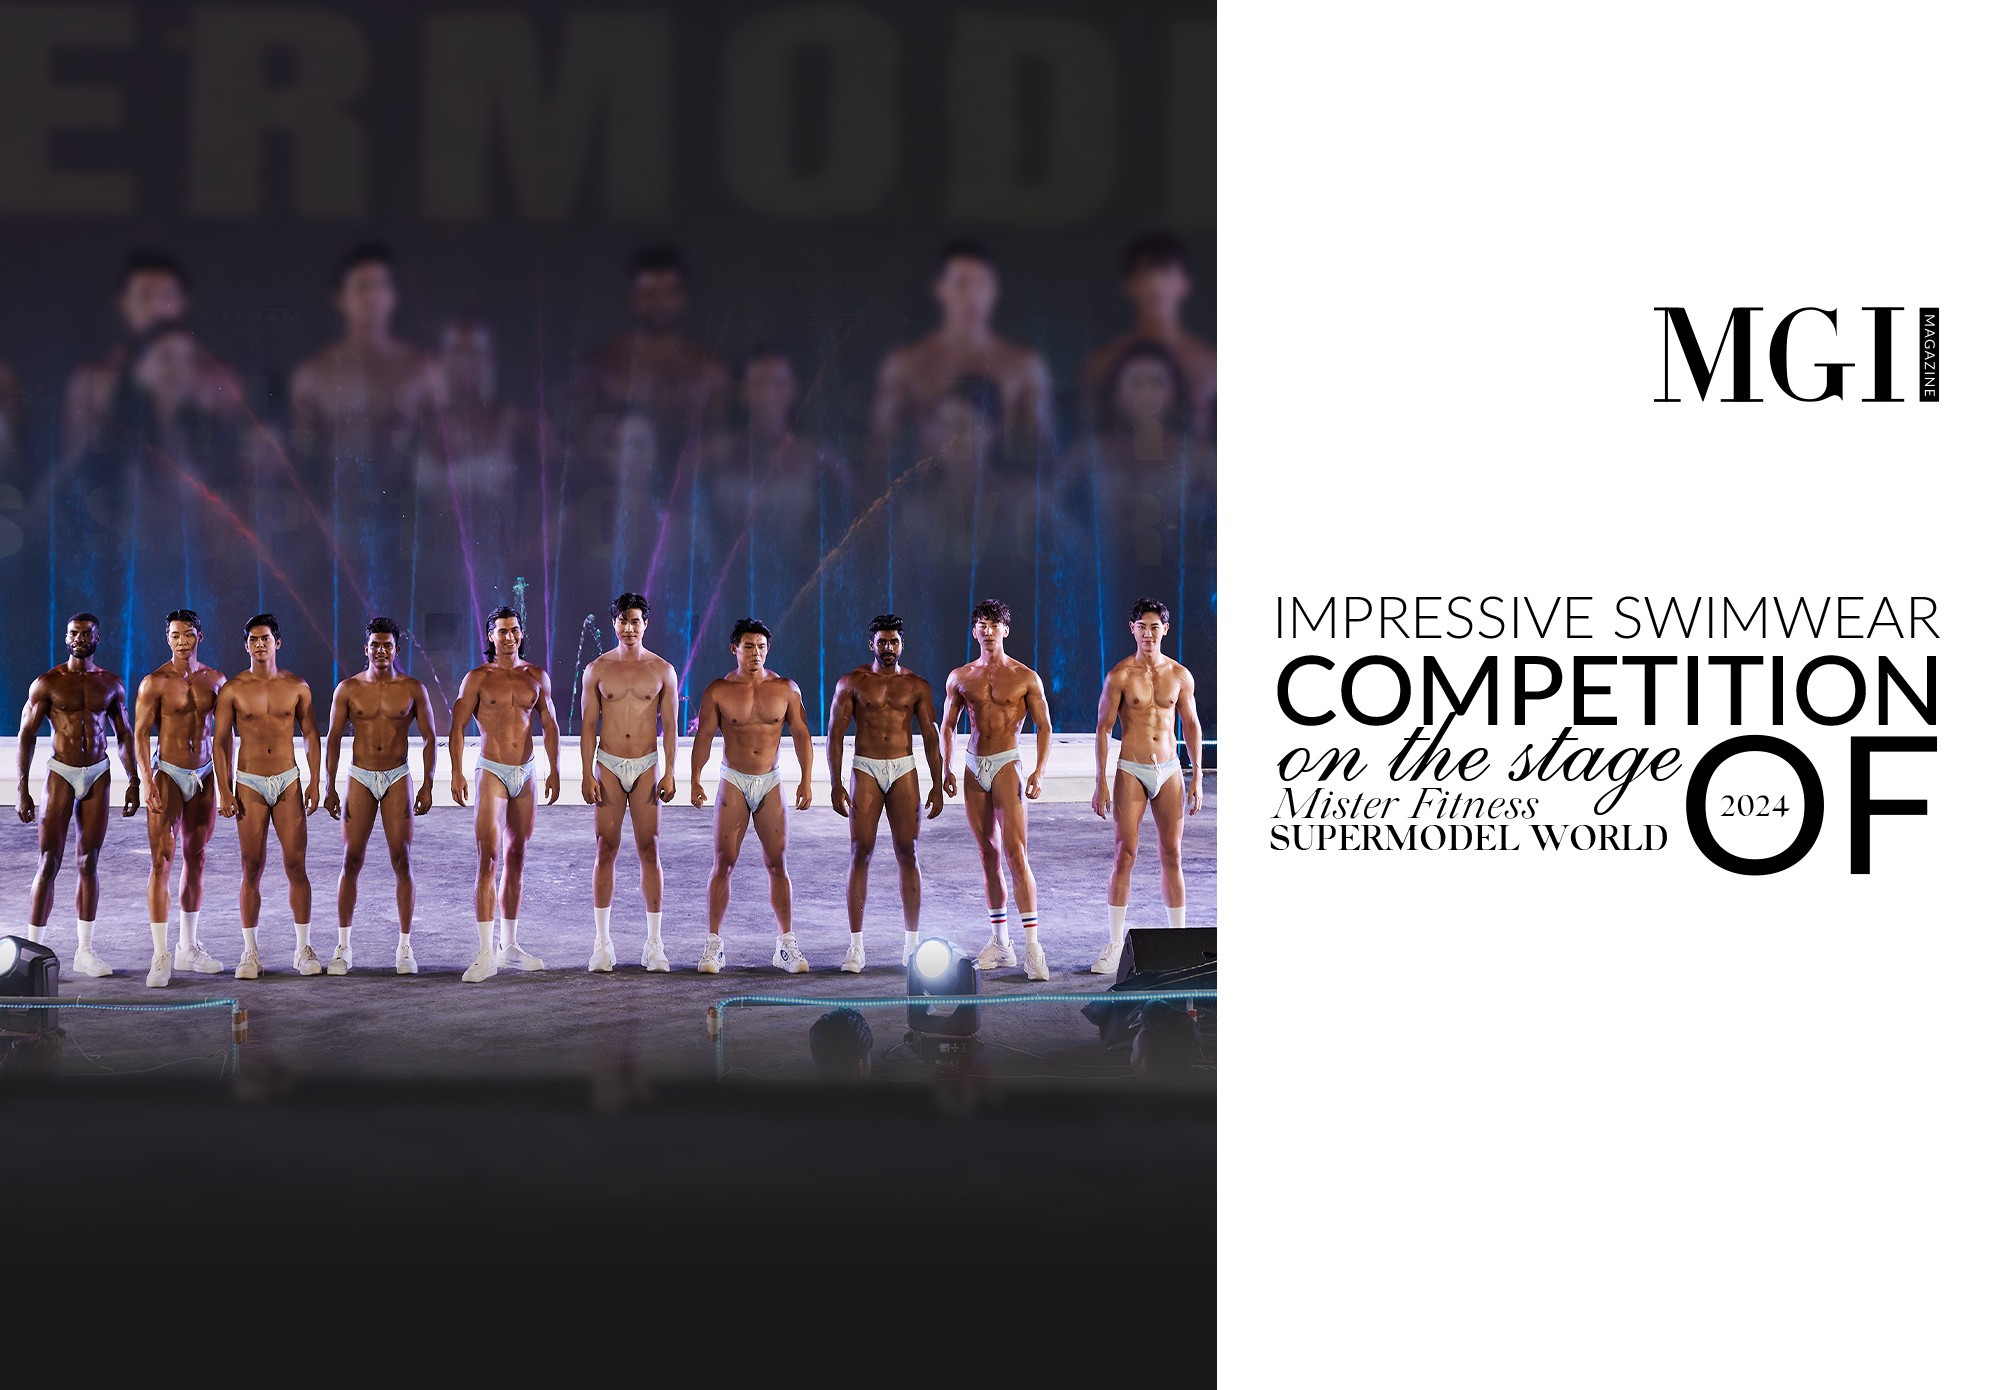 Impressive Swimwear competition on the stage of Mister Fitness Supermodel World 2024